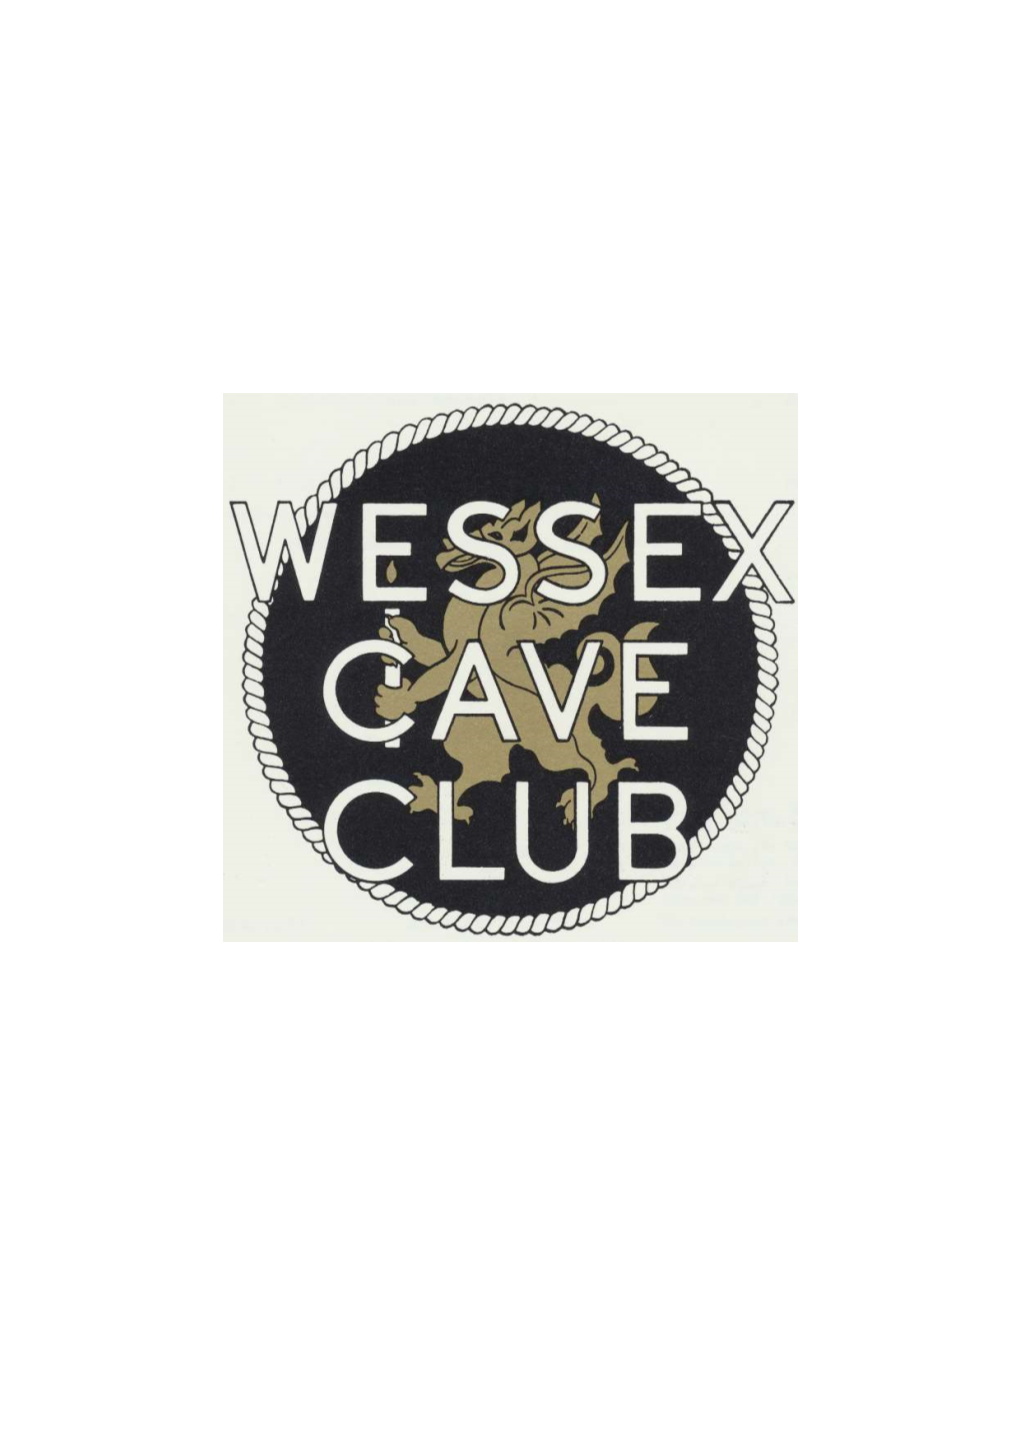 Wessex Cave Club Journal Number